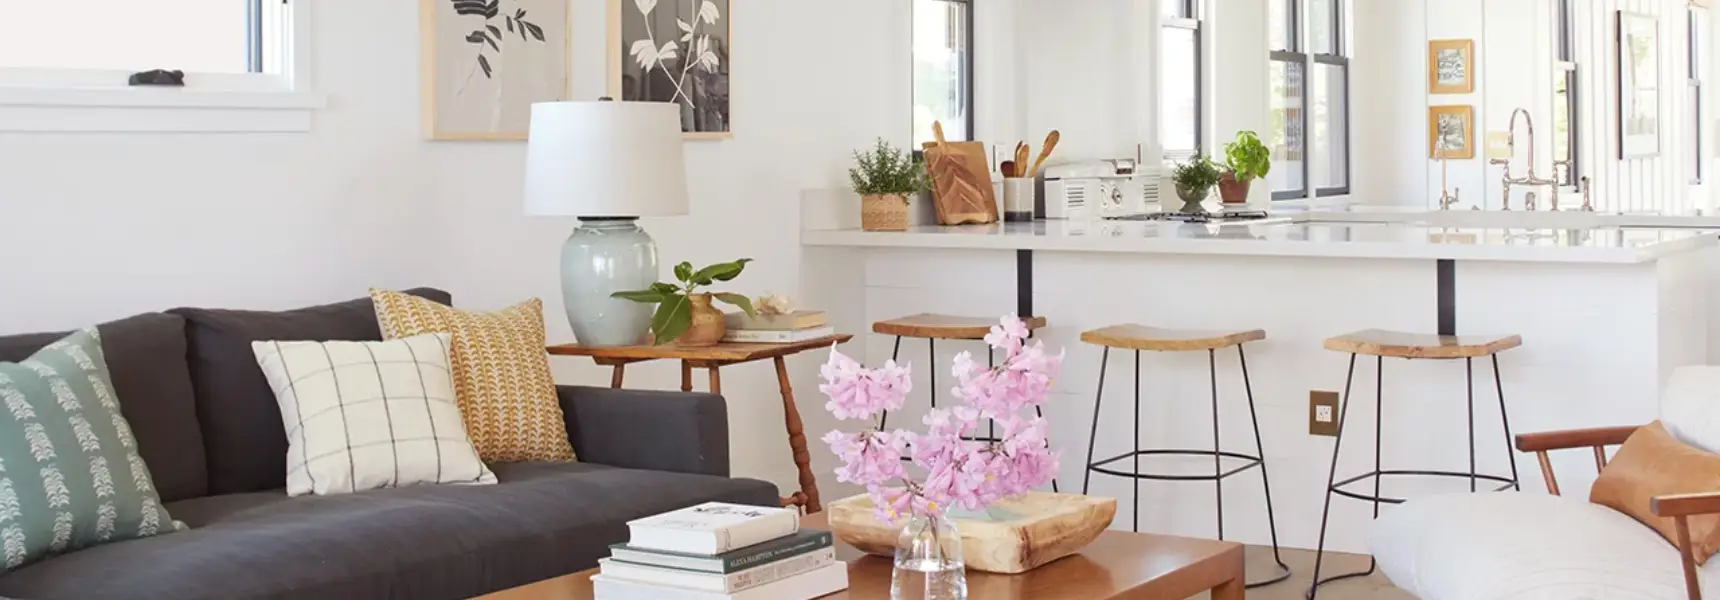 The 5 Most Effective Ways to Make a Room Feel Double its Size